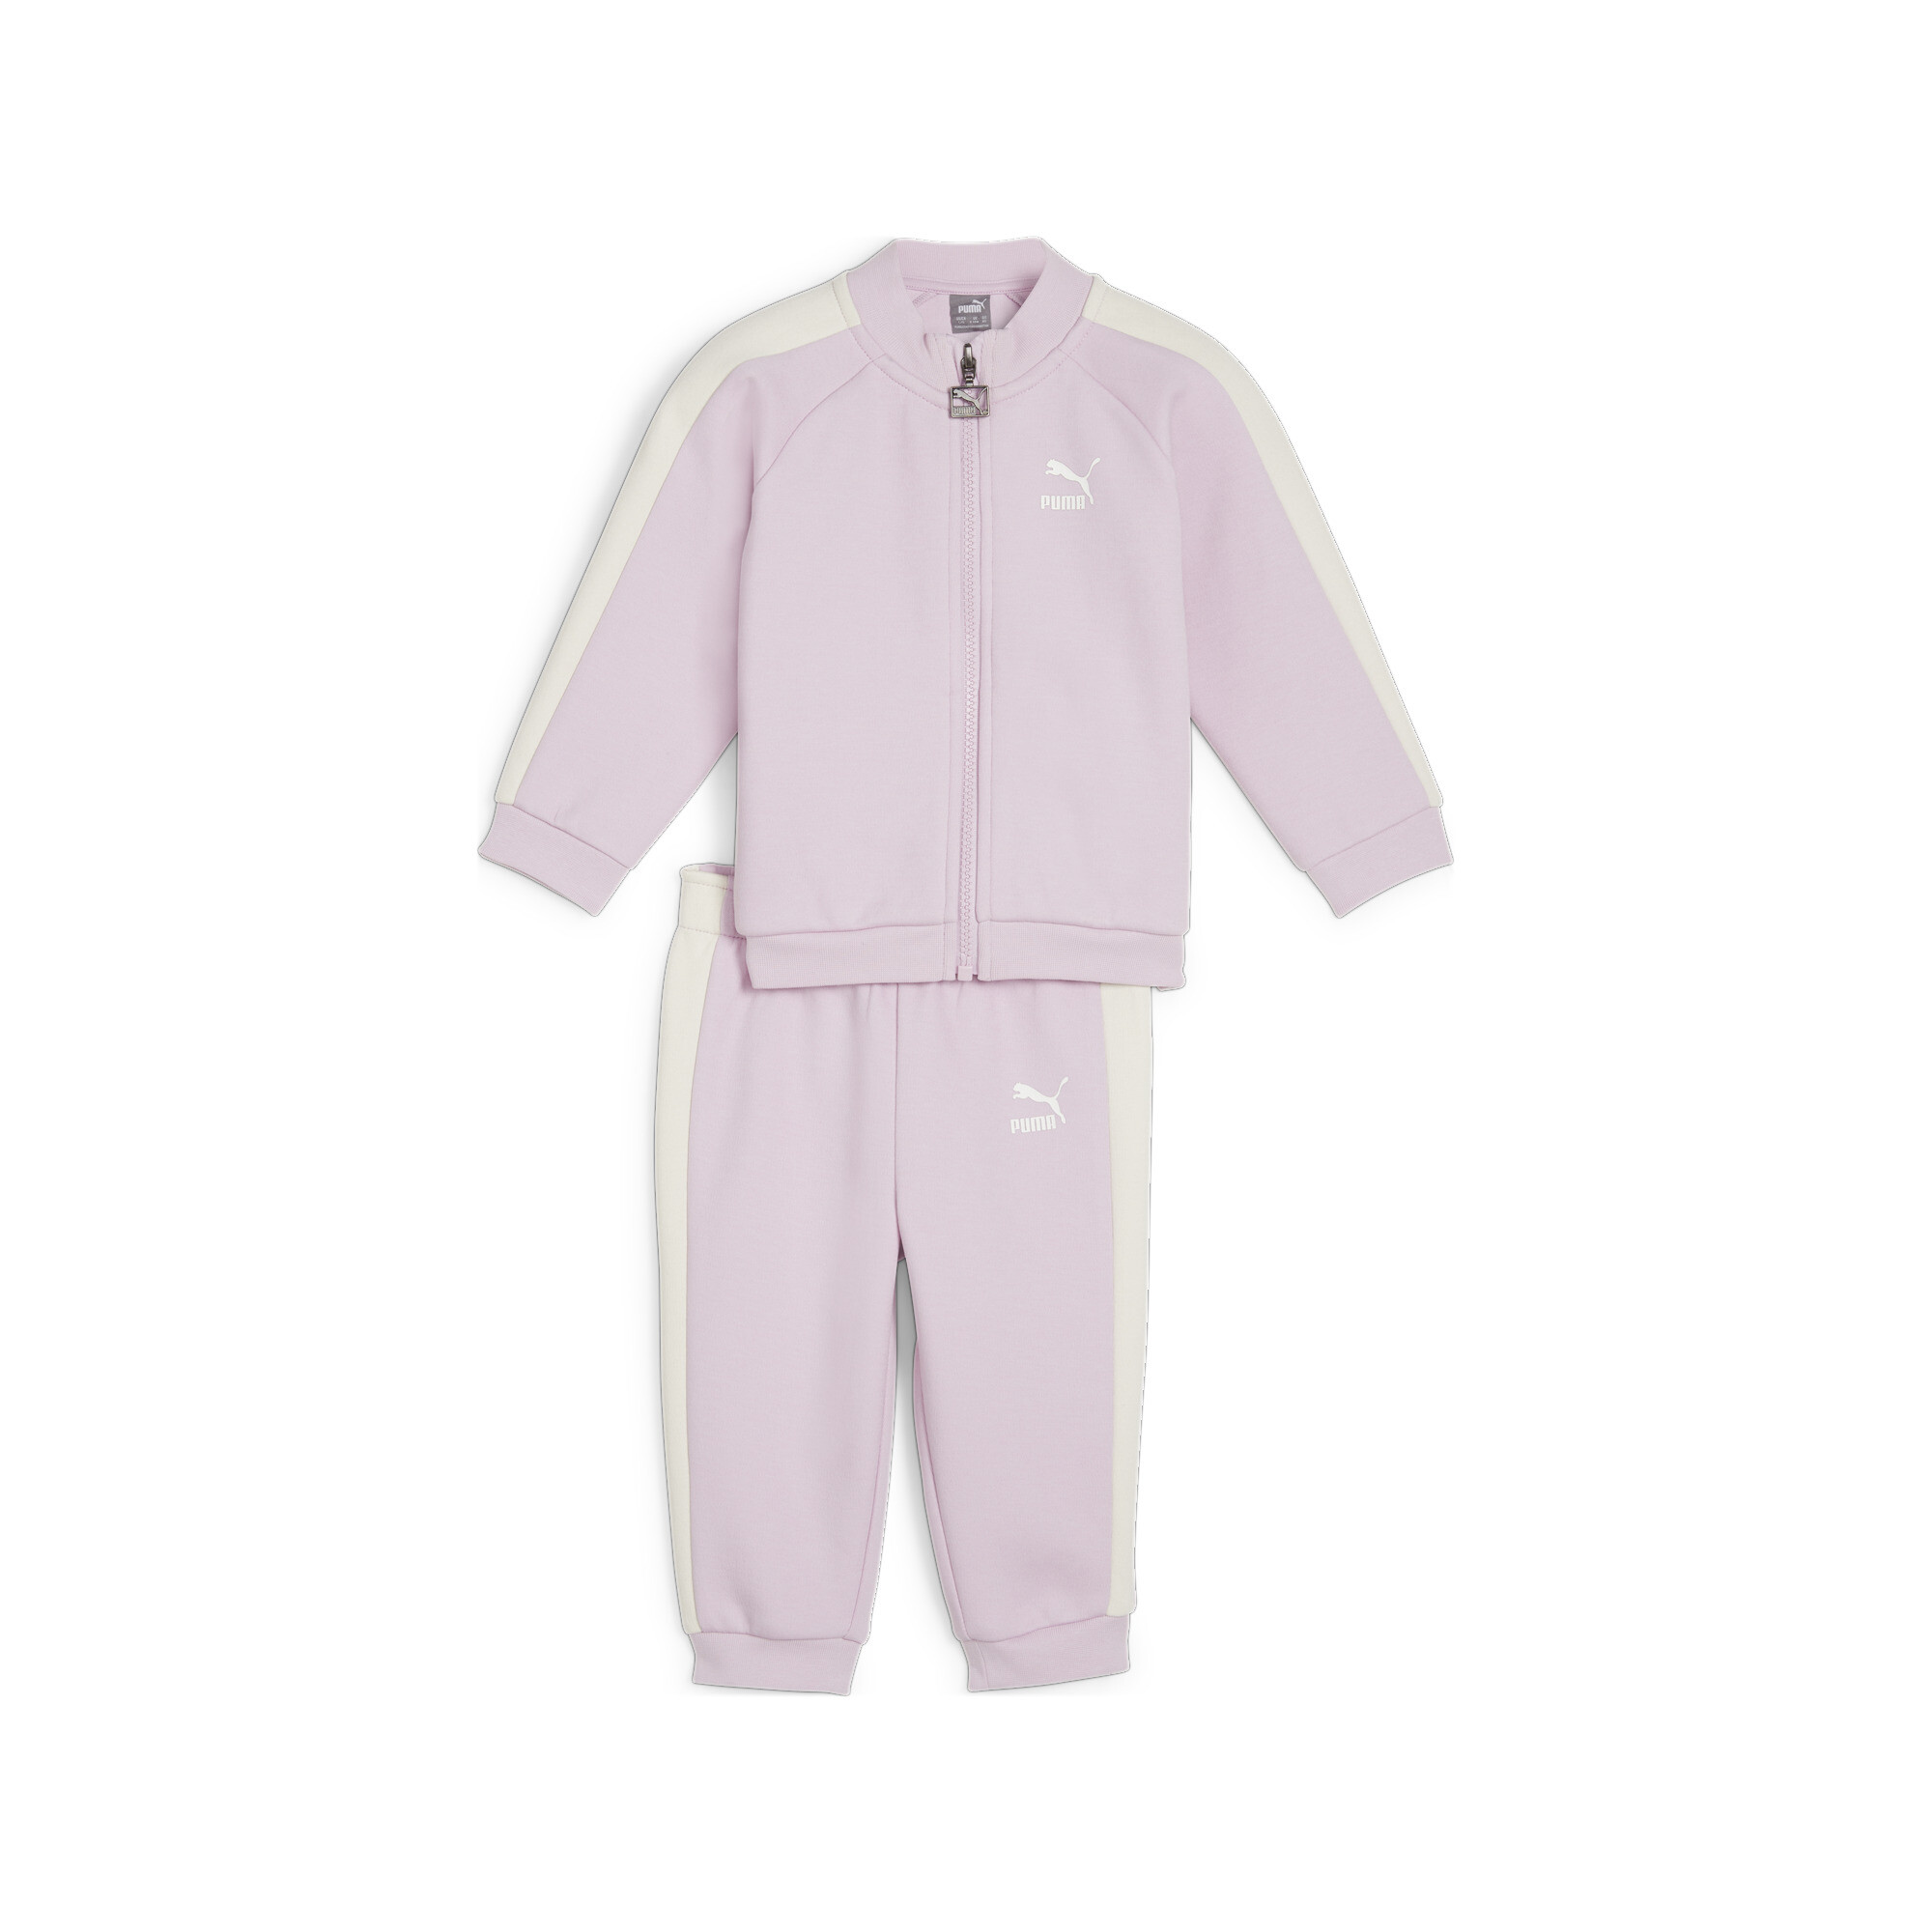 Kids' PUMA MINICATS T7 ICONIC Baby Tracksuit Set In Purple, Size 2-3 Months